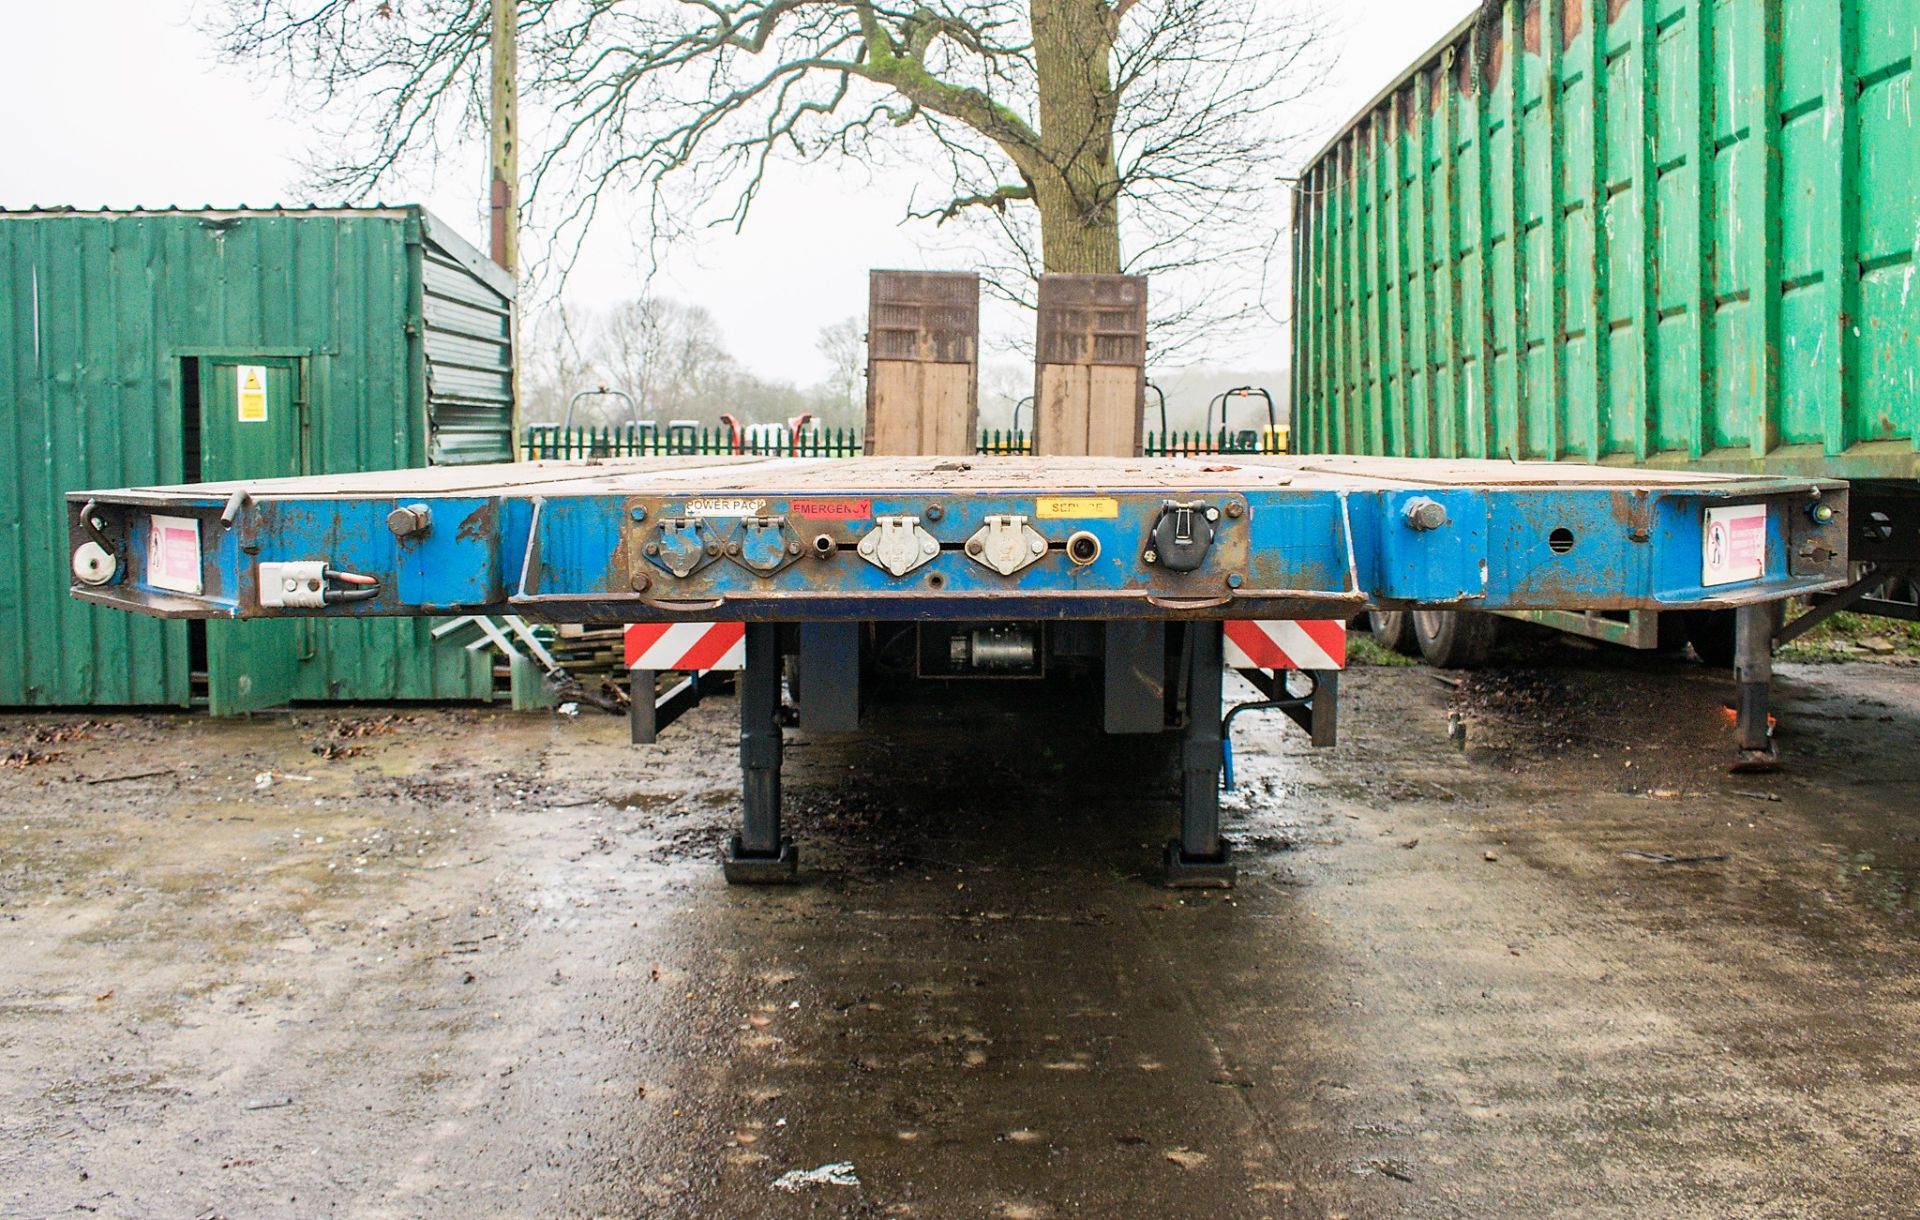 King 13.6 metre step frame tri-axle low loader trailer Year: 2007 Identification Number: C255860 S/ - Image 5 of 16